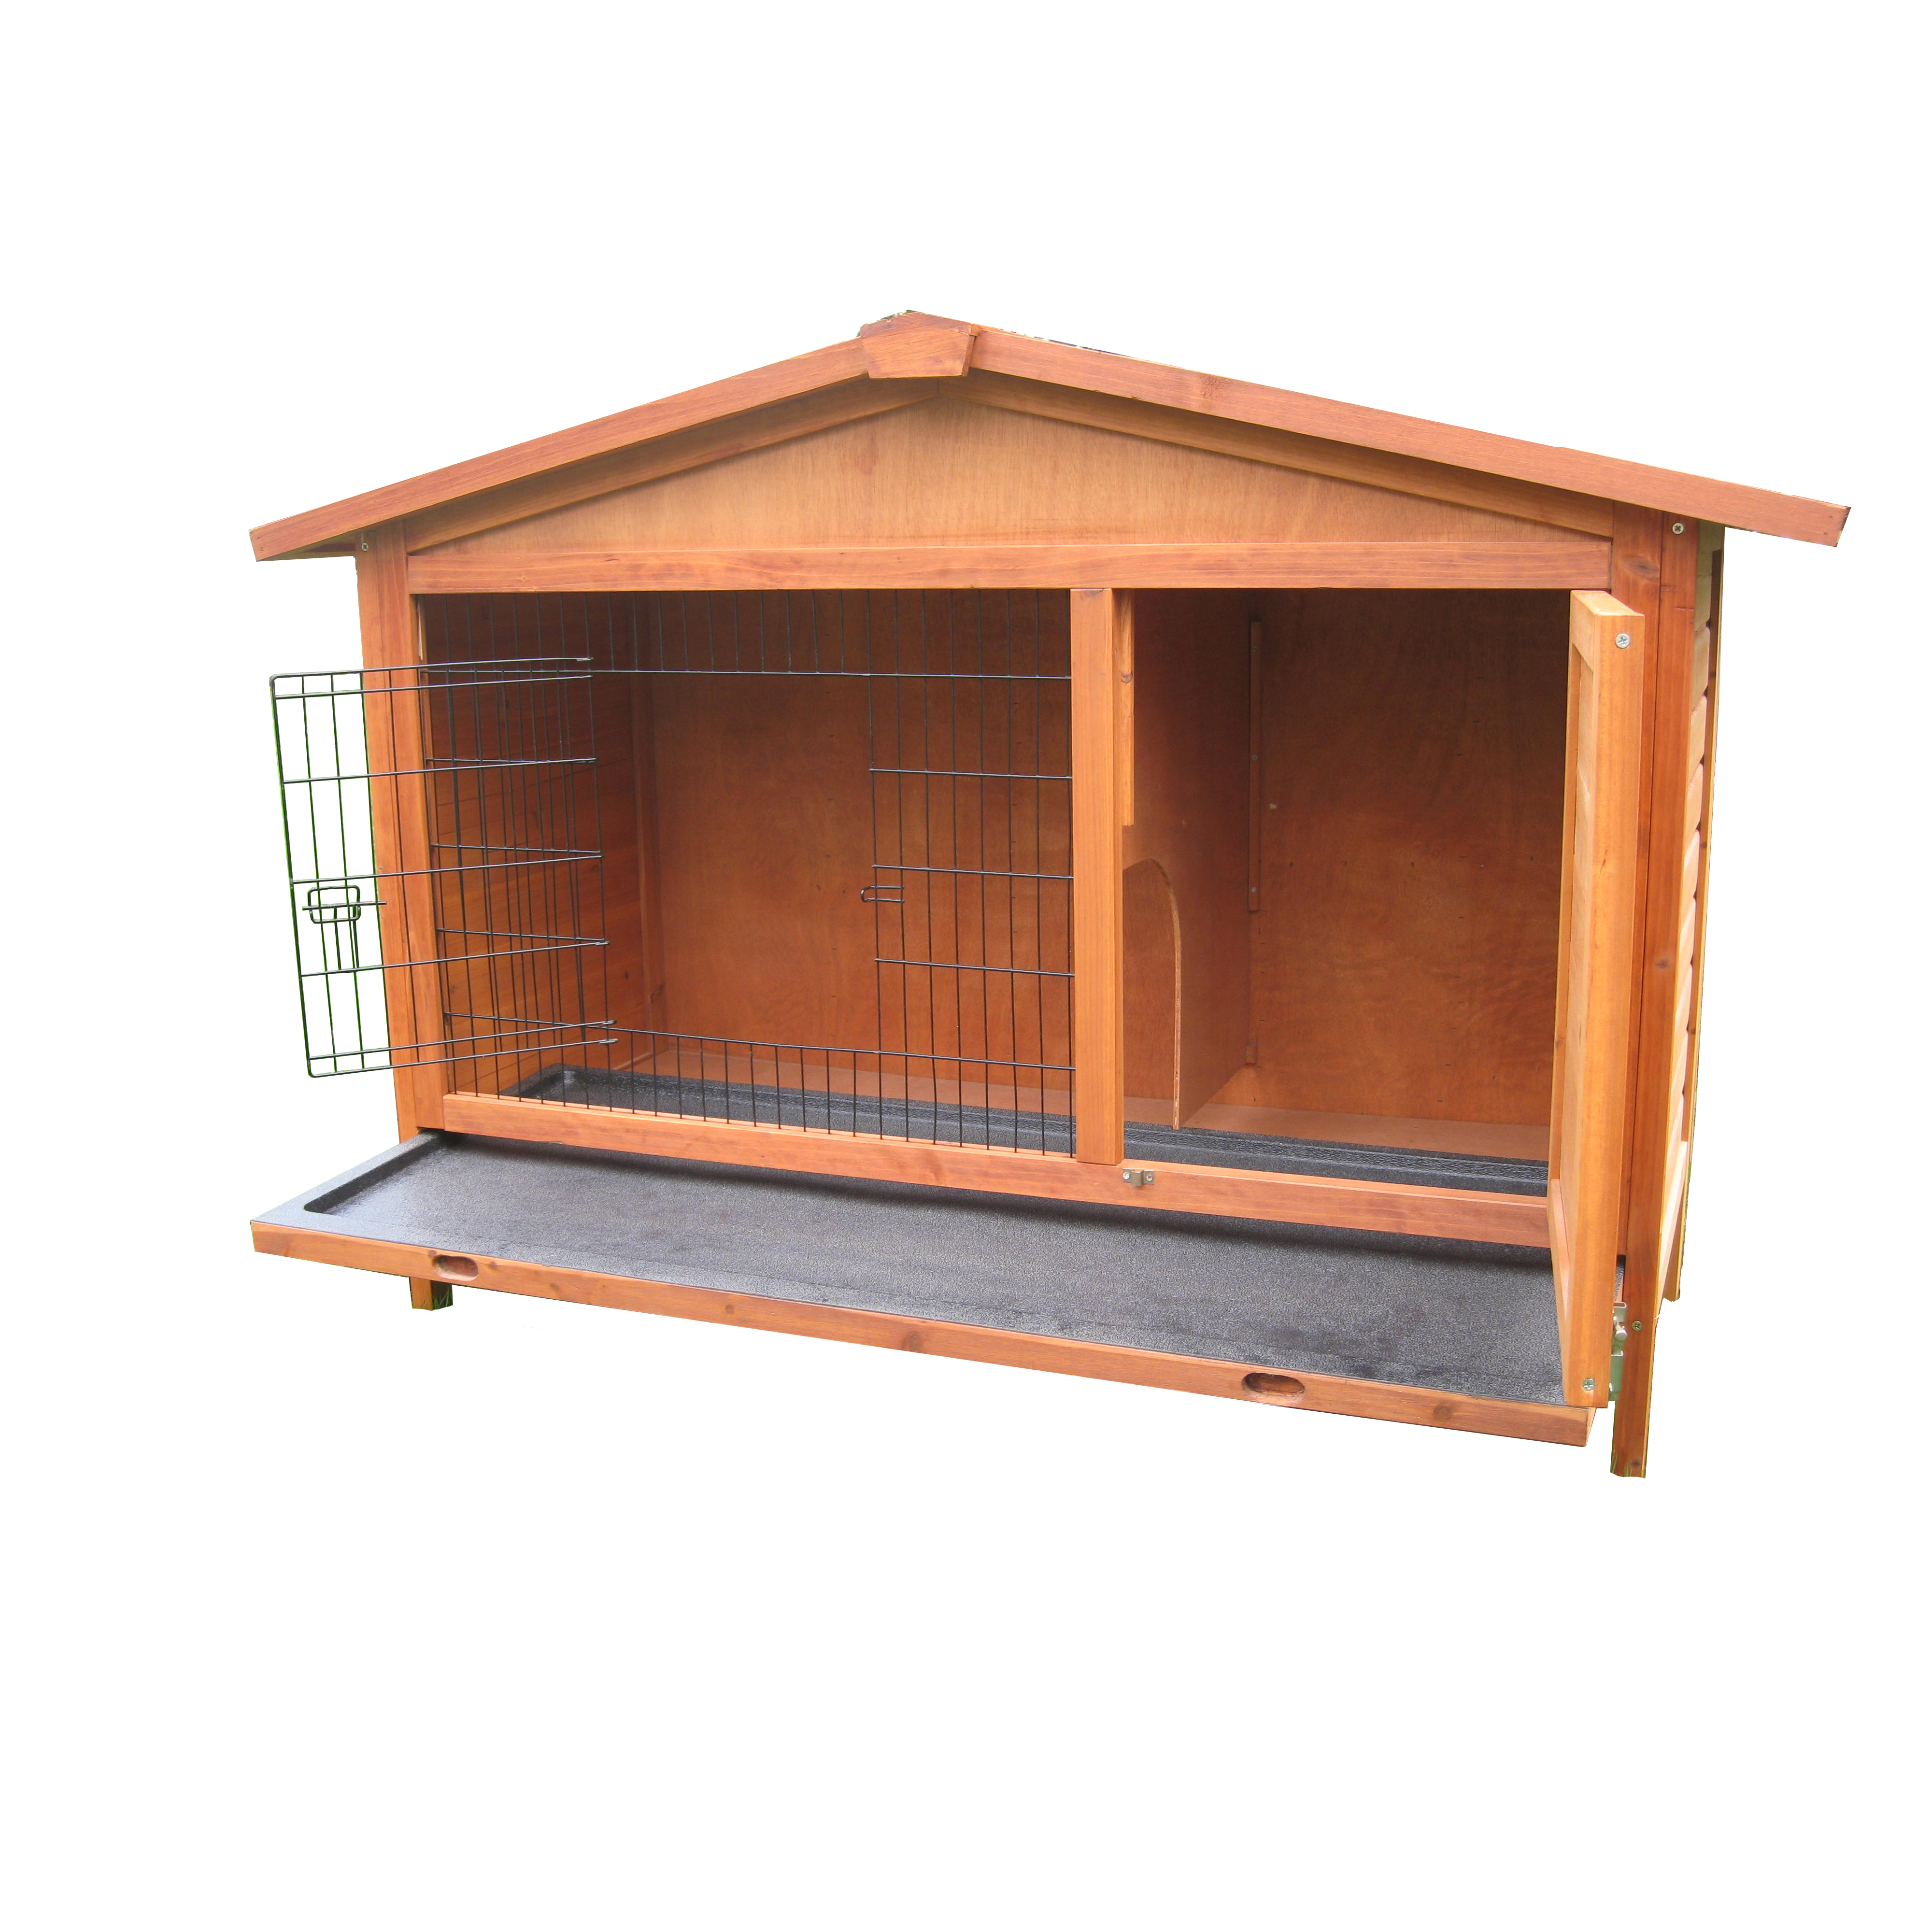 Factory Cheap Hot 48 Inch Dog Crate -
 fir wood easy assembled eco friendly outdoor Wooden Metal Floor Wood Rabbit Cage bunny house Sale – Easy